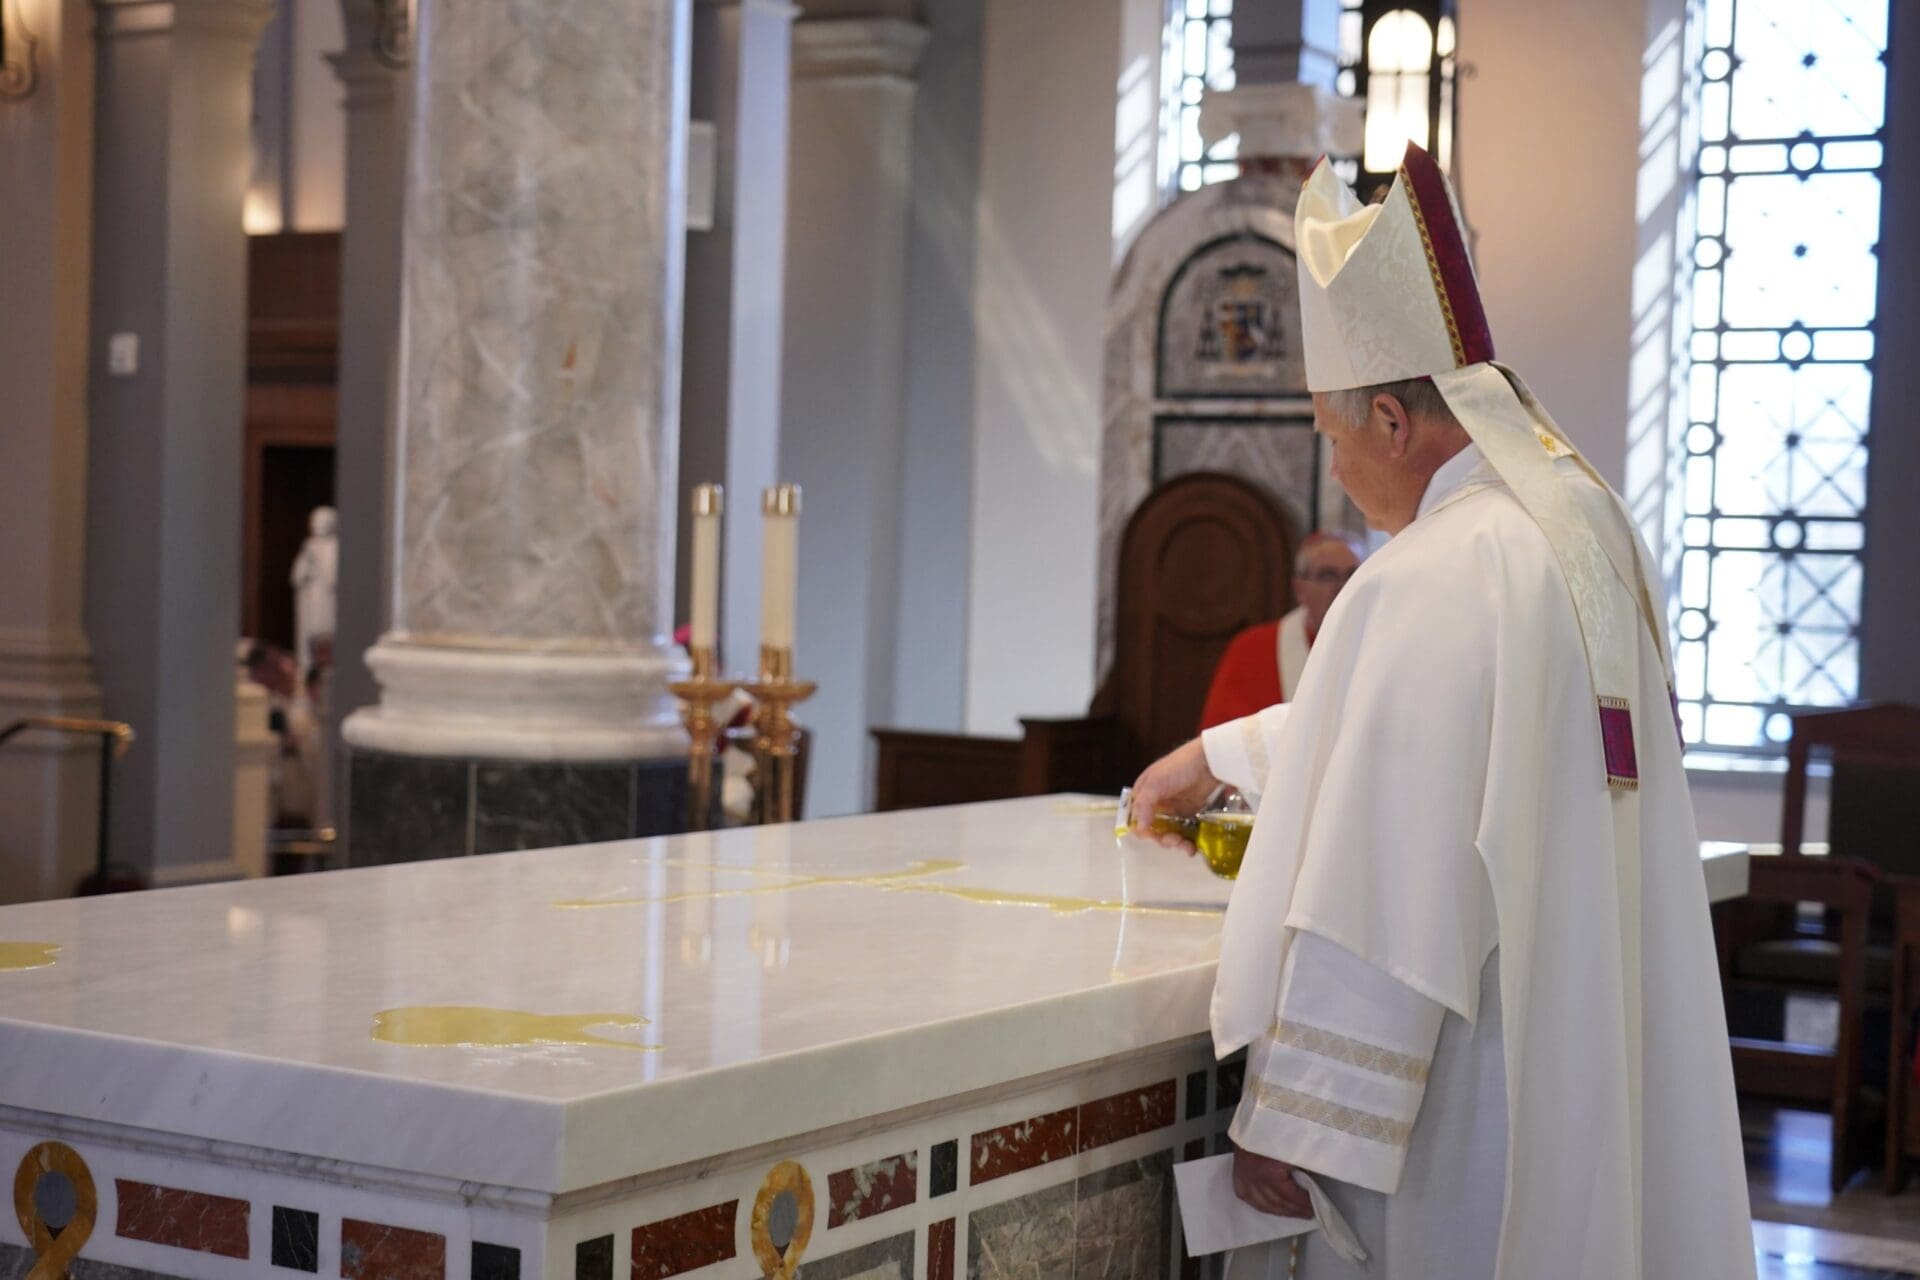 Q: How is an altar initiated according to the rites of the Church?